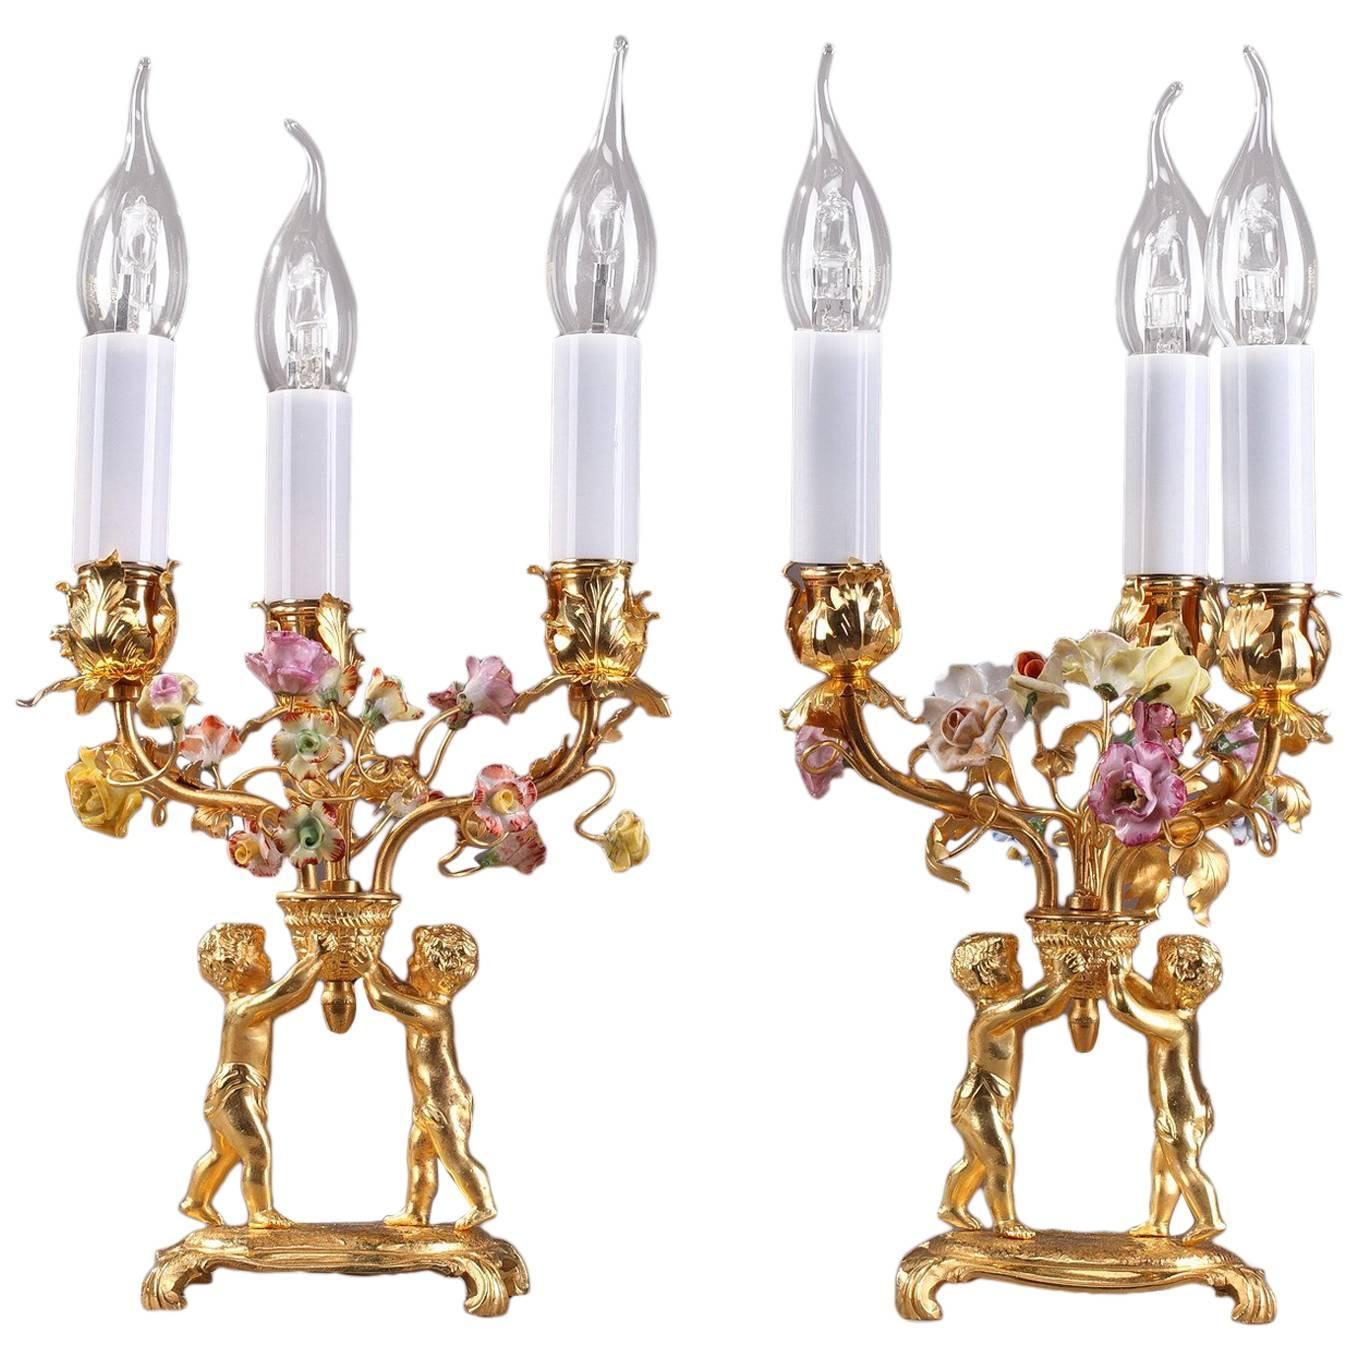 Pair of Gilt Bronze and Porcelain Candelabras in Louis XV Style